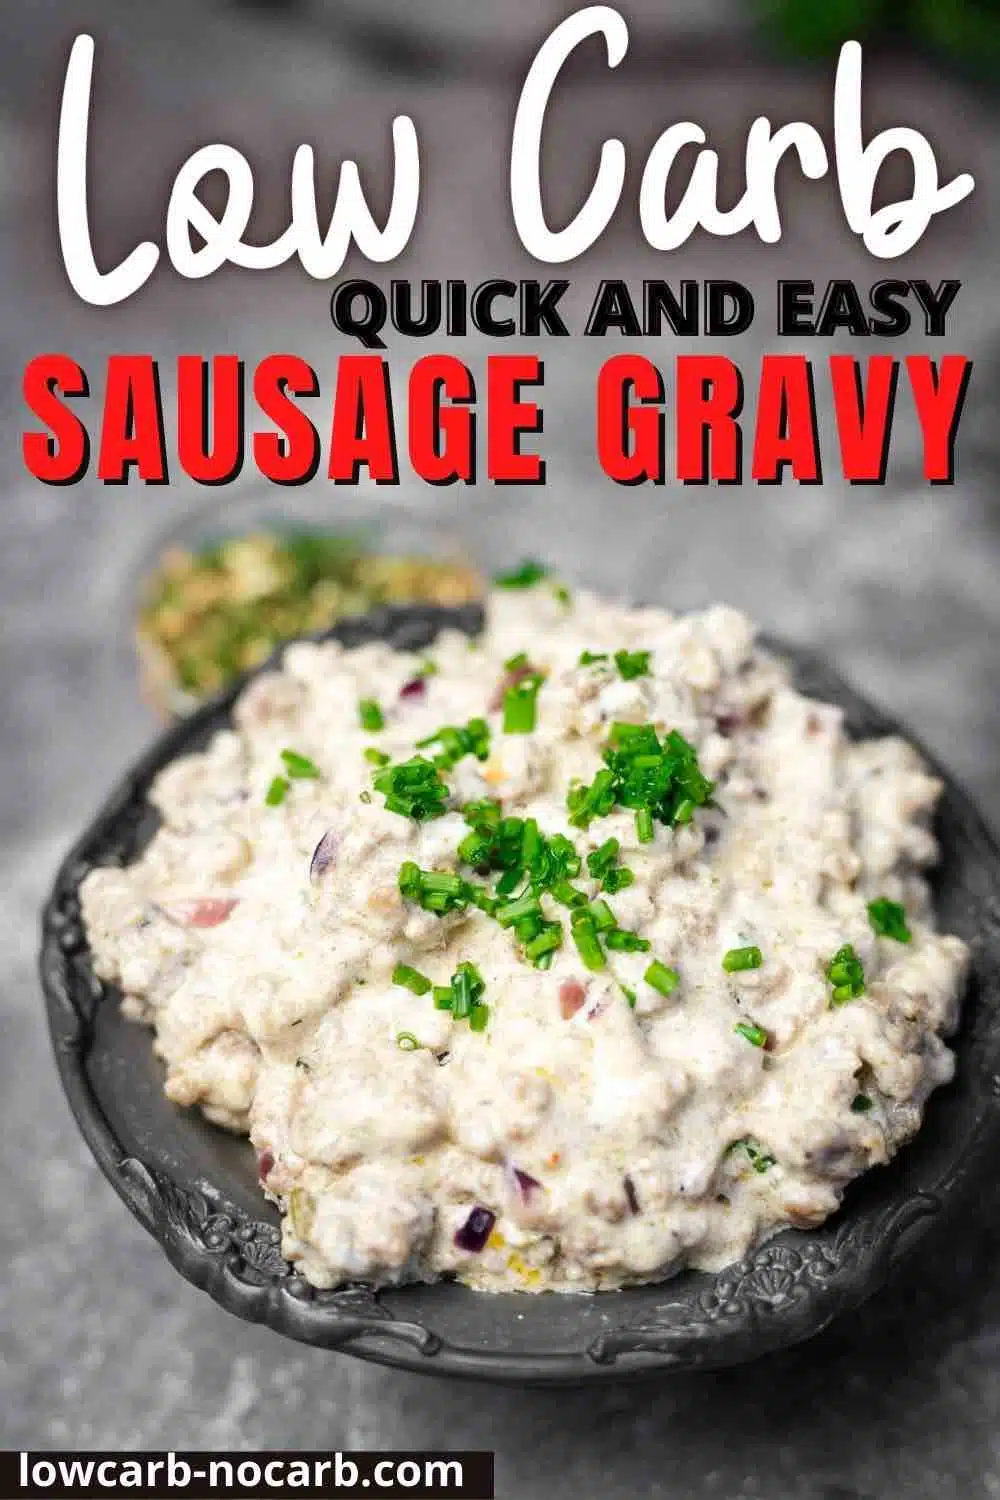 Sausage with Gravy inside a metal sauce bowl.